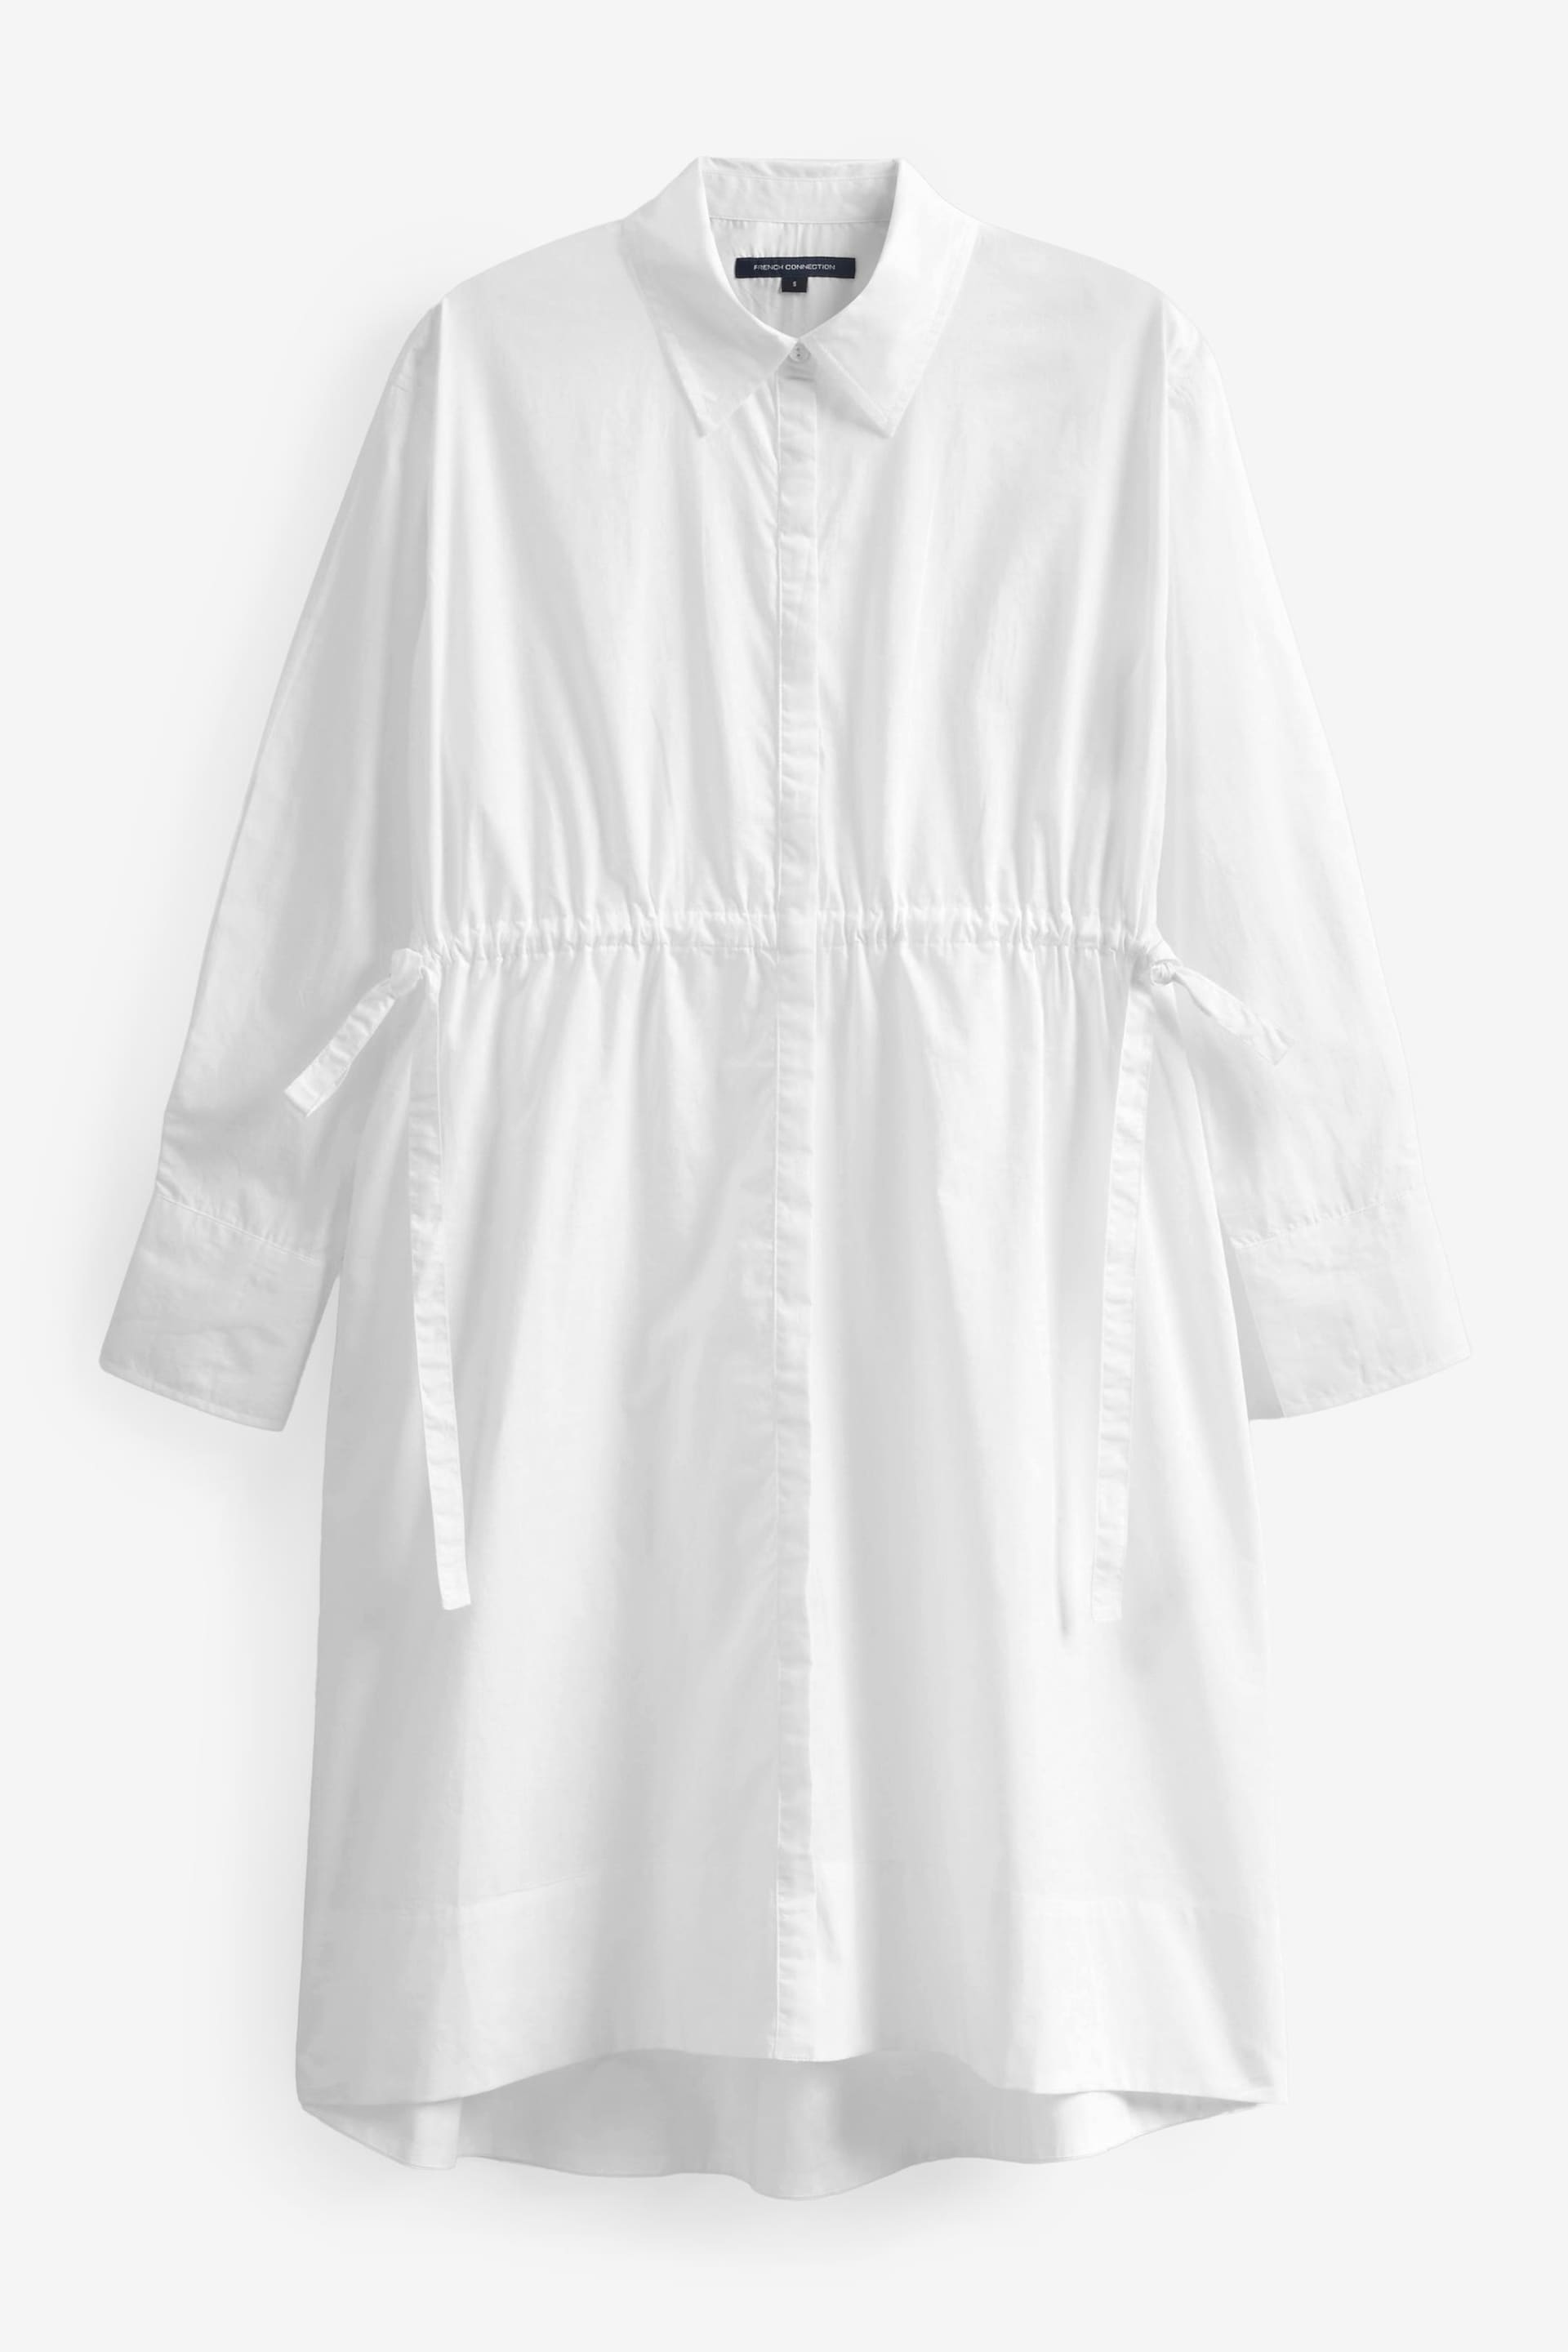 French Connection Rhodes Sust Poplin Shirt Dress - Image 4 of 4